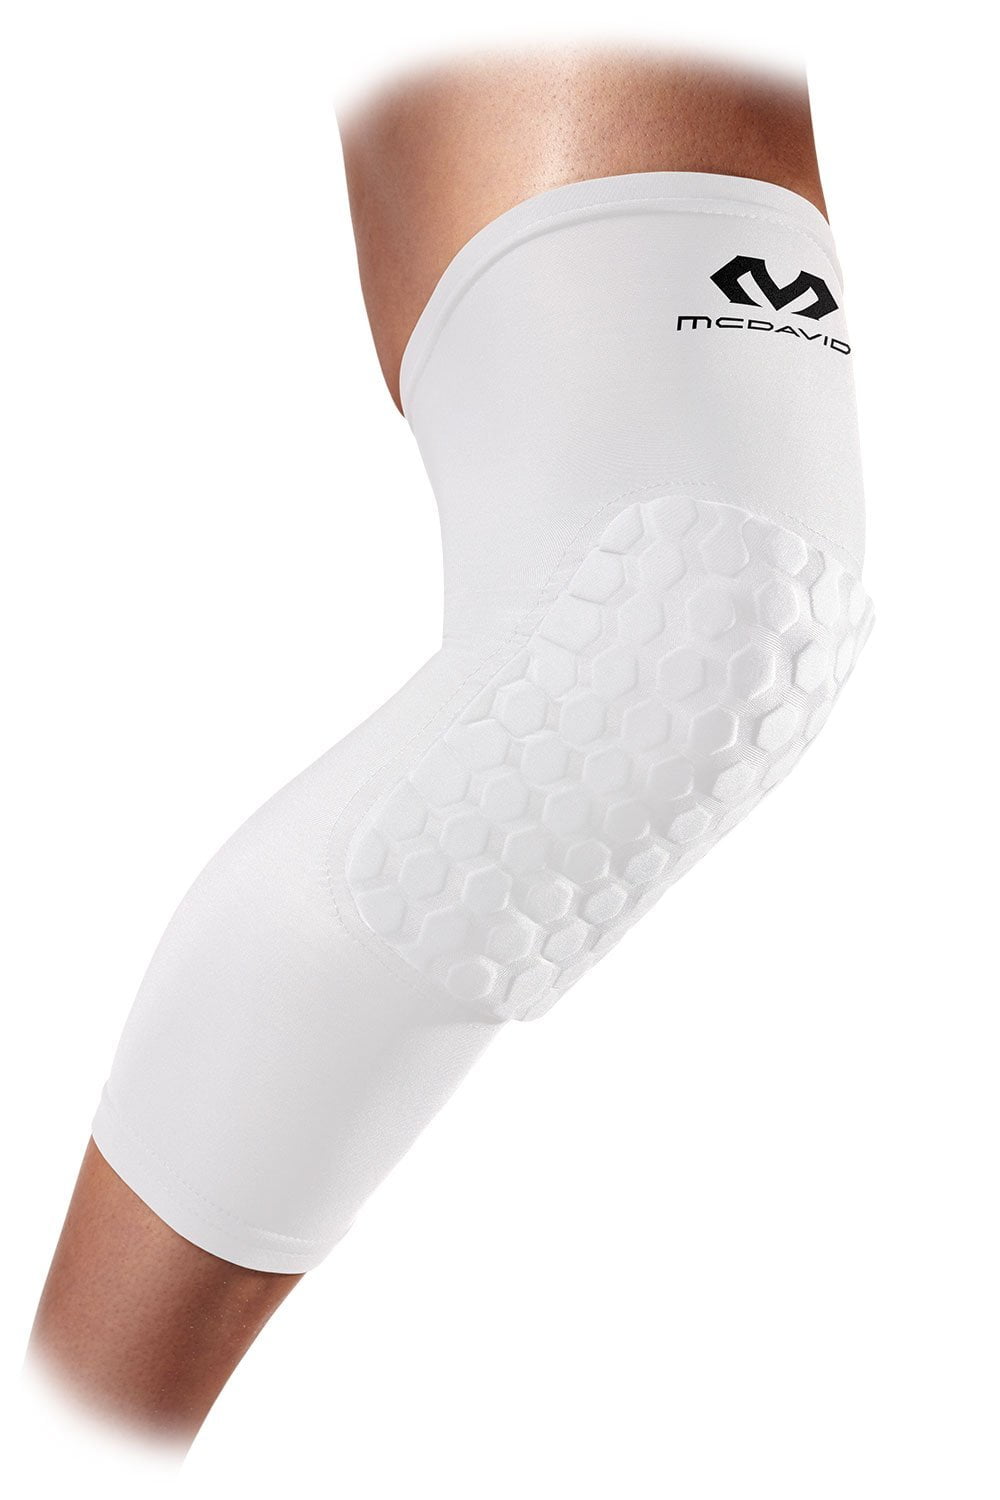 Brand New Pair McDavid Hex Protective Pads 6446 Leg Sleeves Choose Size/Color 